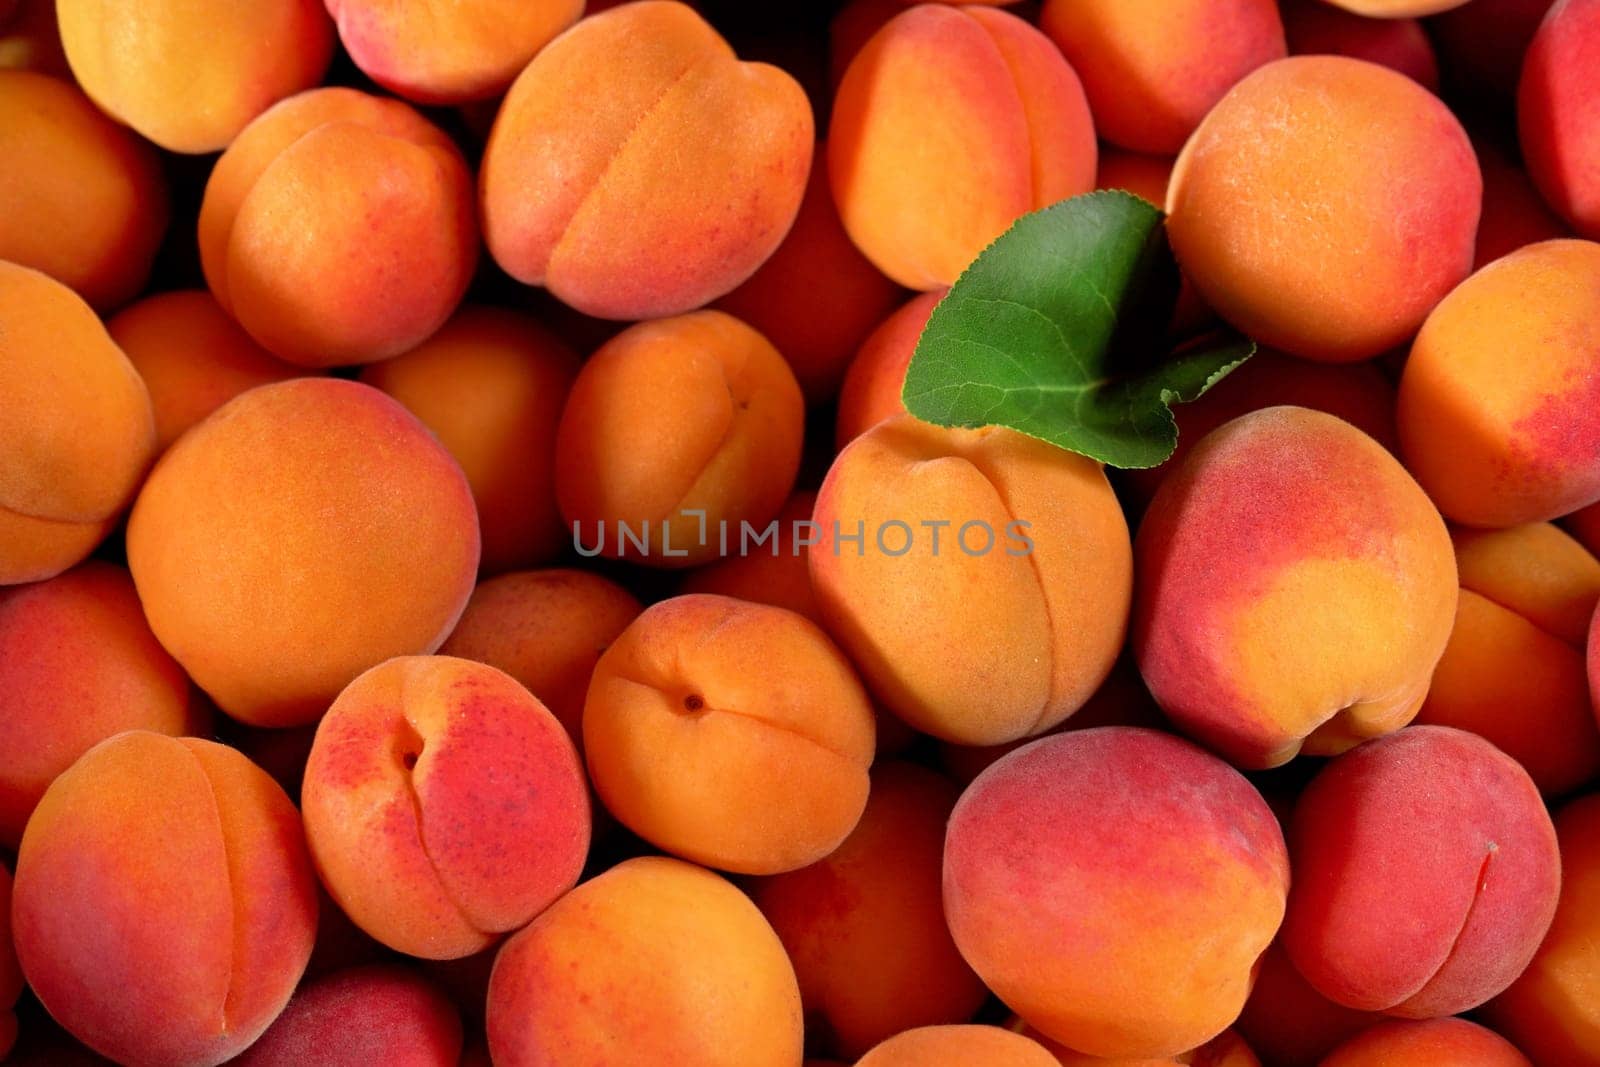 Heap of fresh apricots with one green leaf, closeup detail photo from above by Ivanko